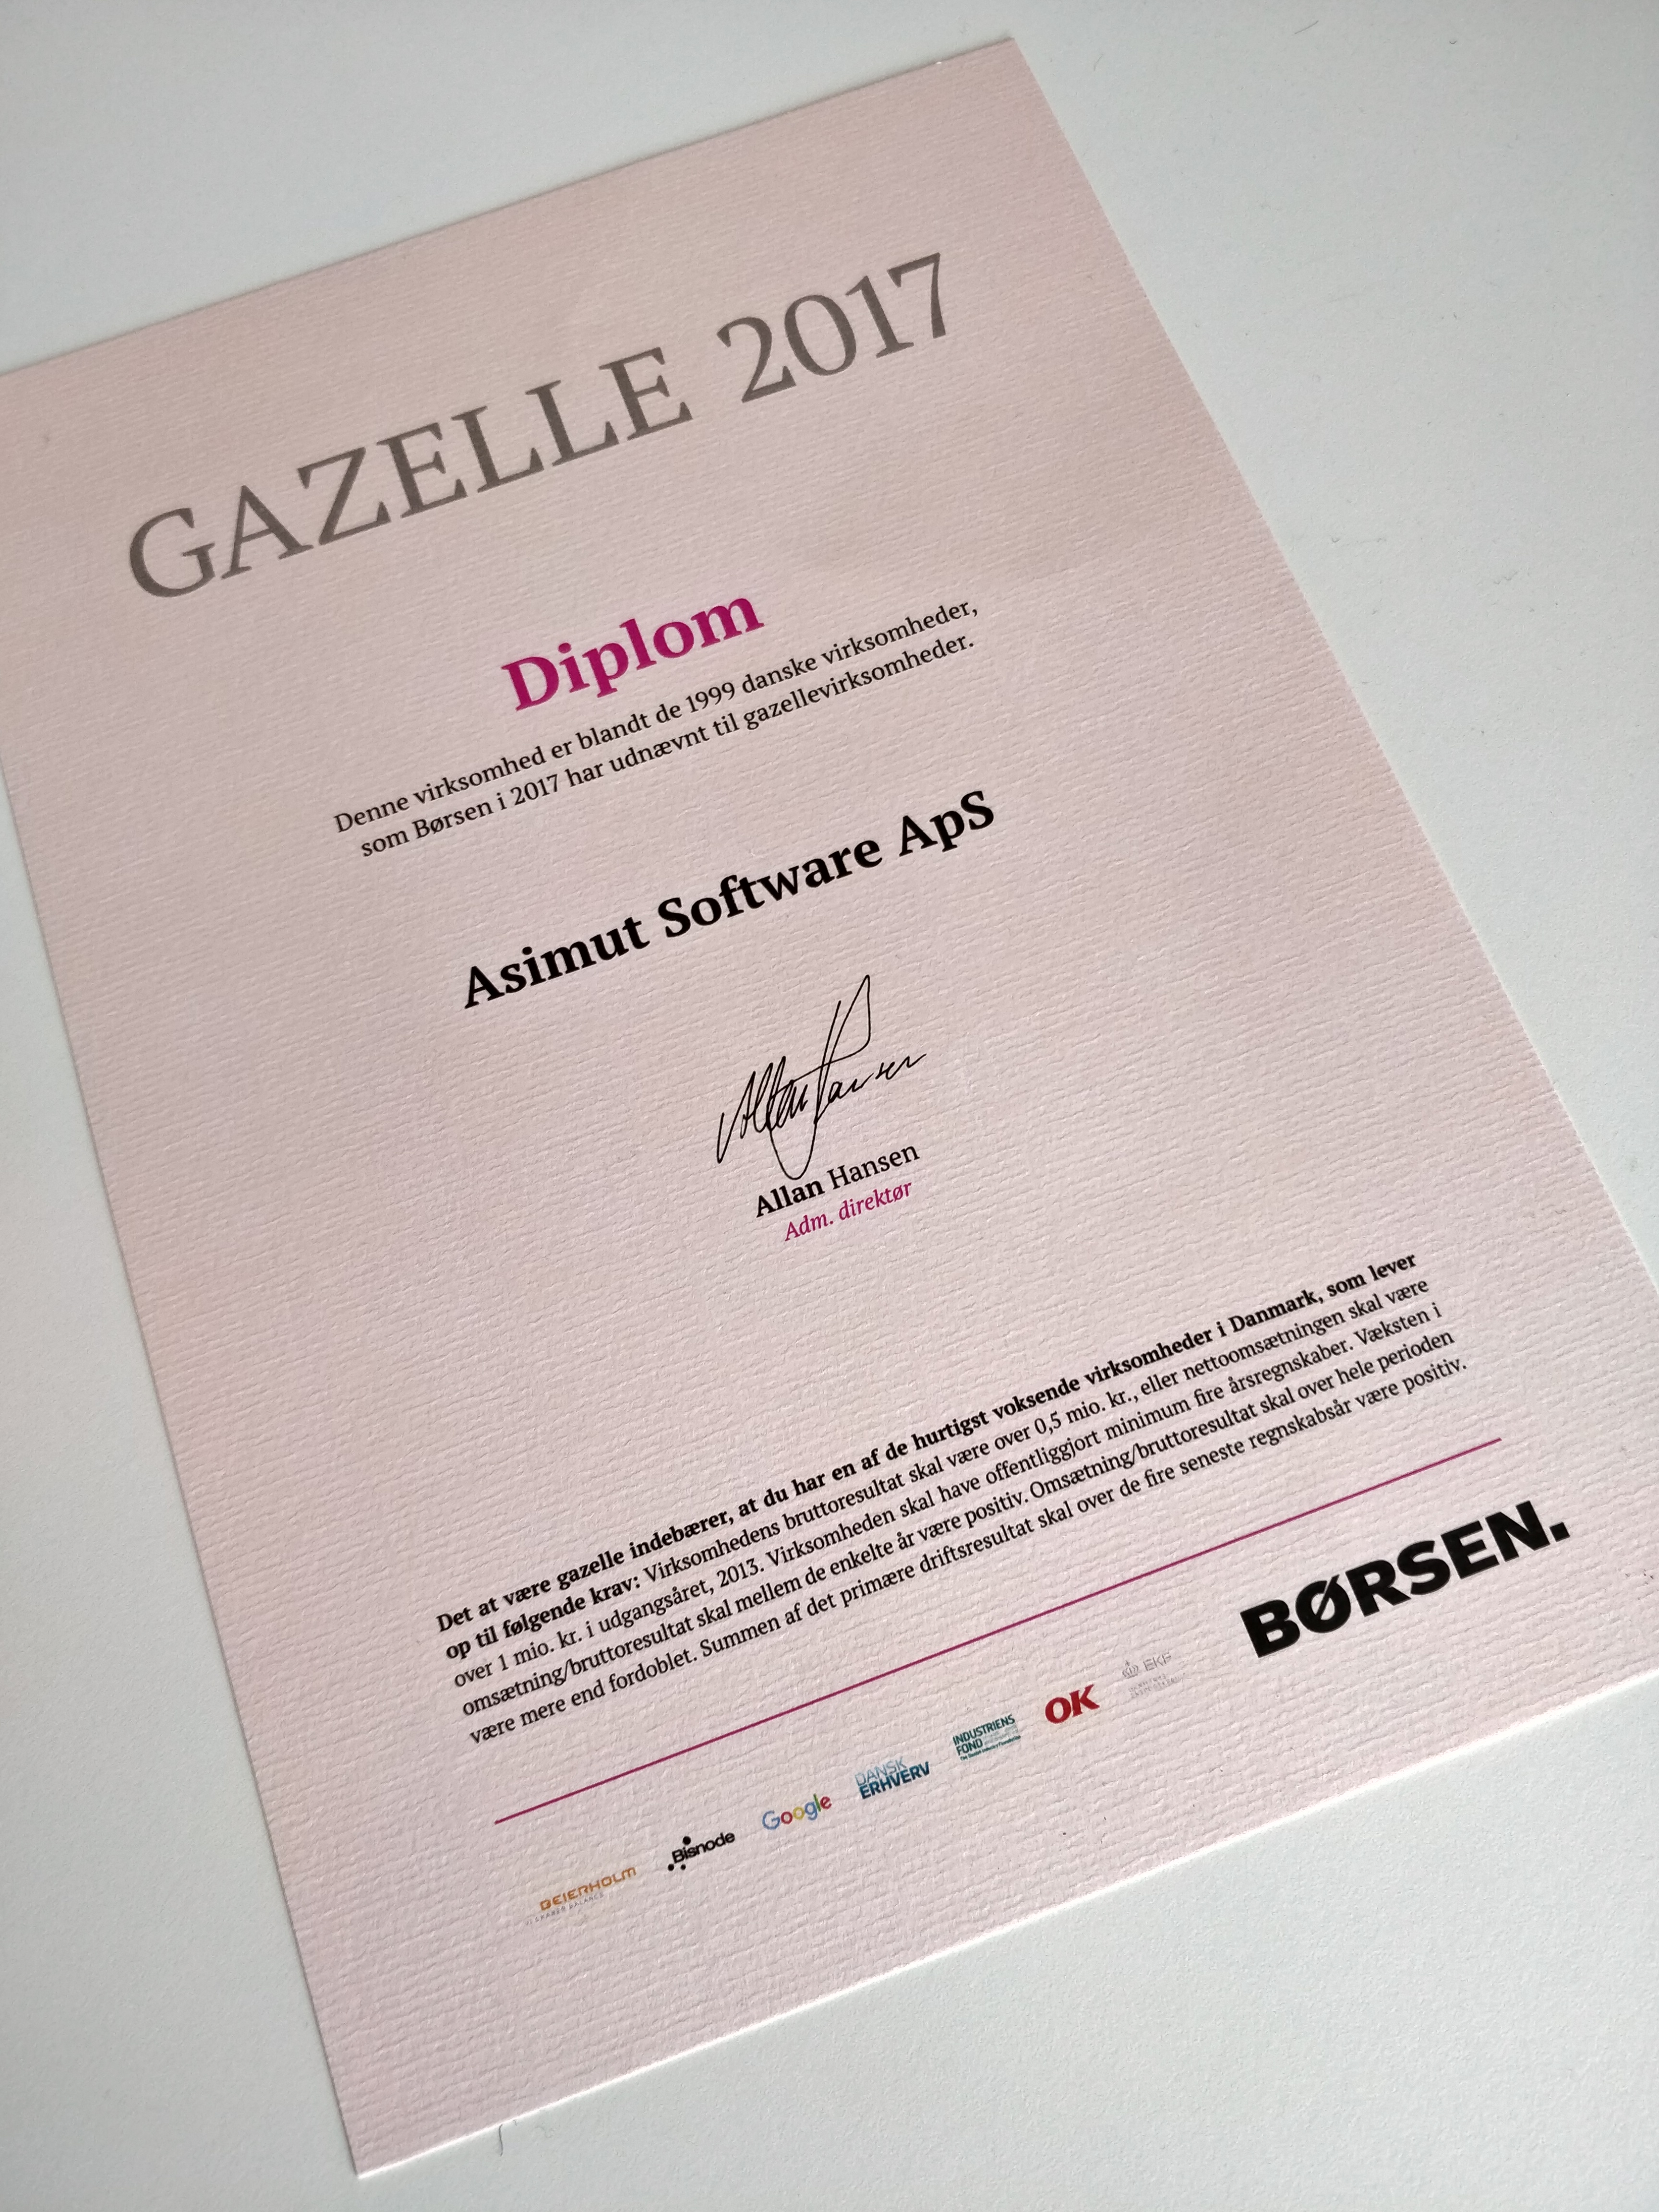 The Gazelle Diploma for ASIMUT software